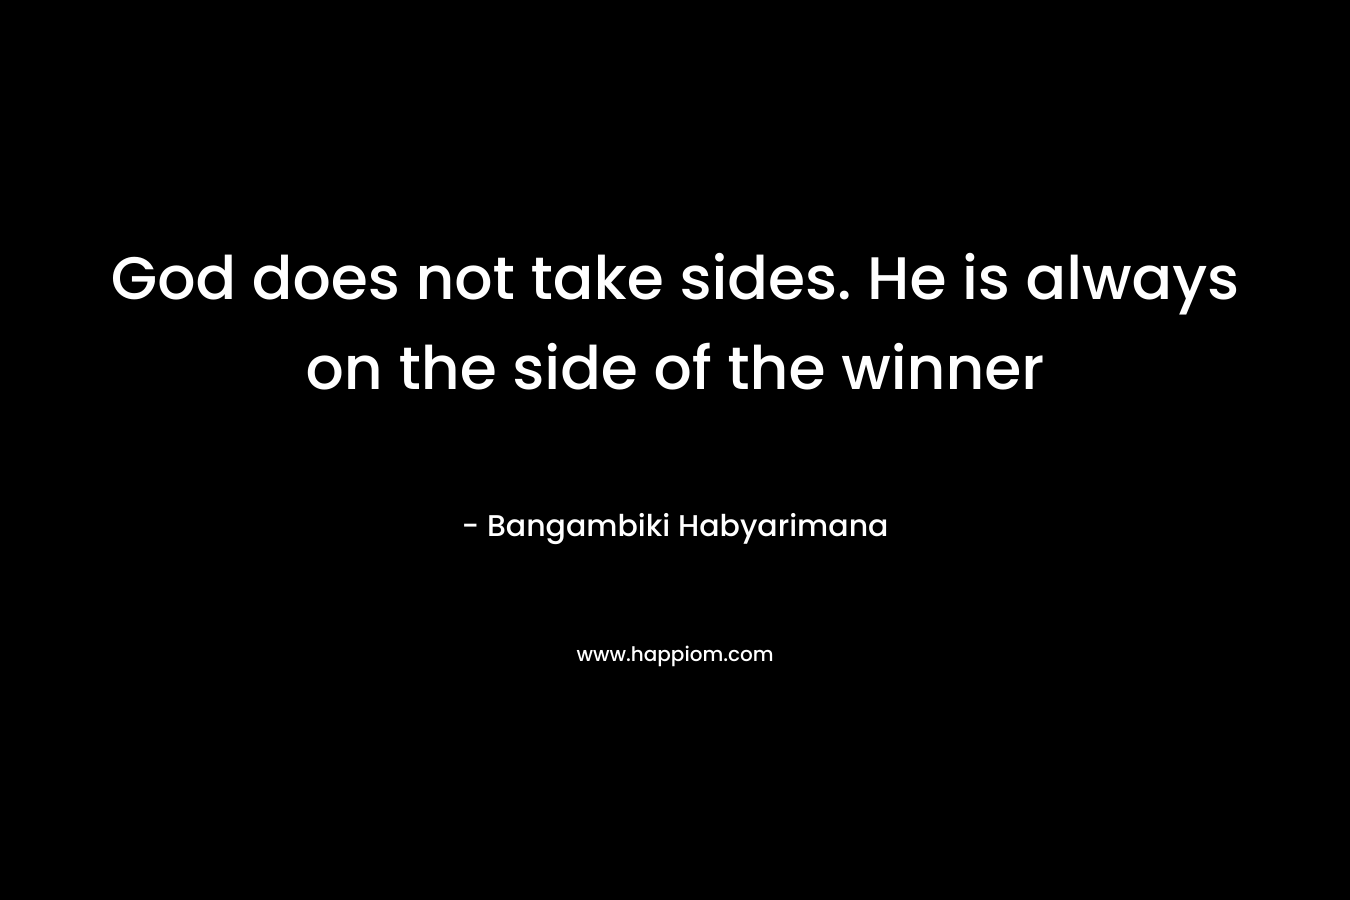 God does not take sides. He is always on the side of the winner – Bangambiki Habyarimana